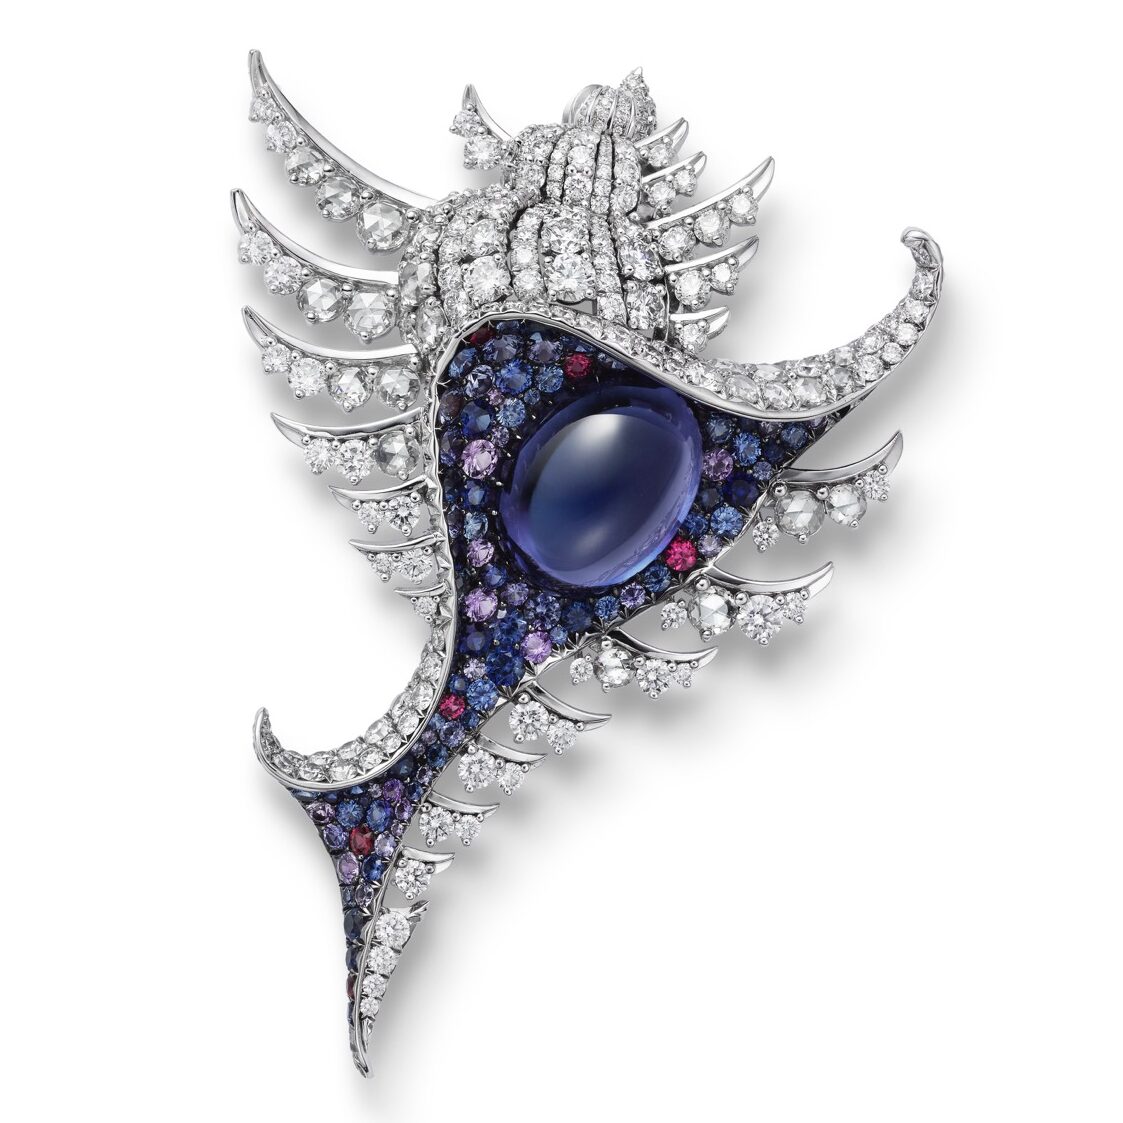 Stunning High Jewelry from Chanel, Cartier and Others Debuts in